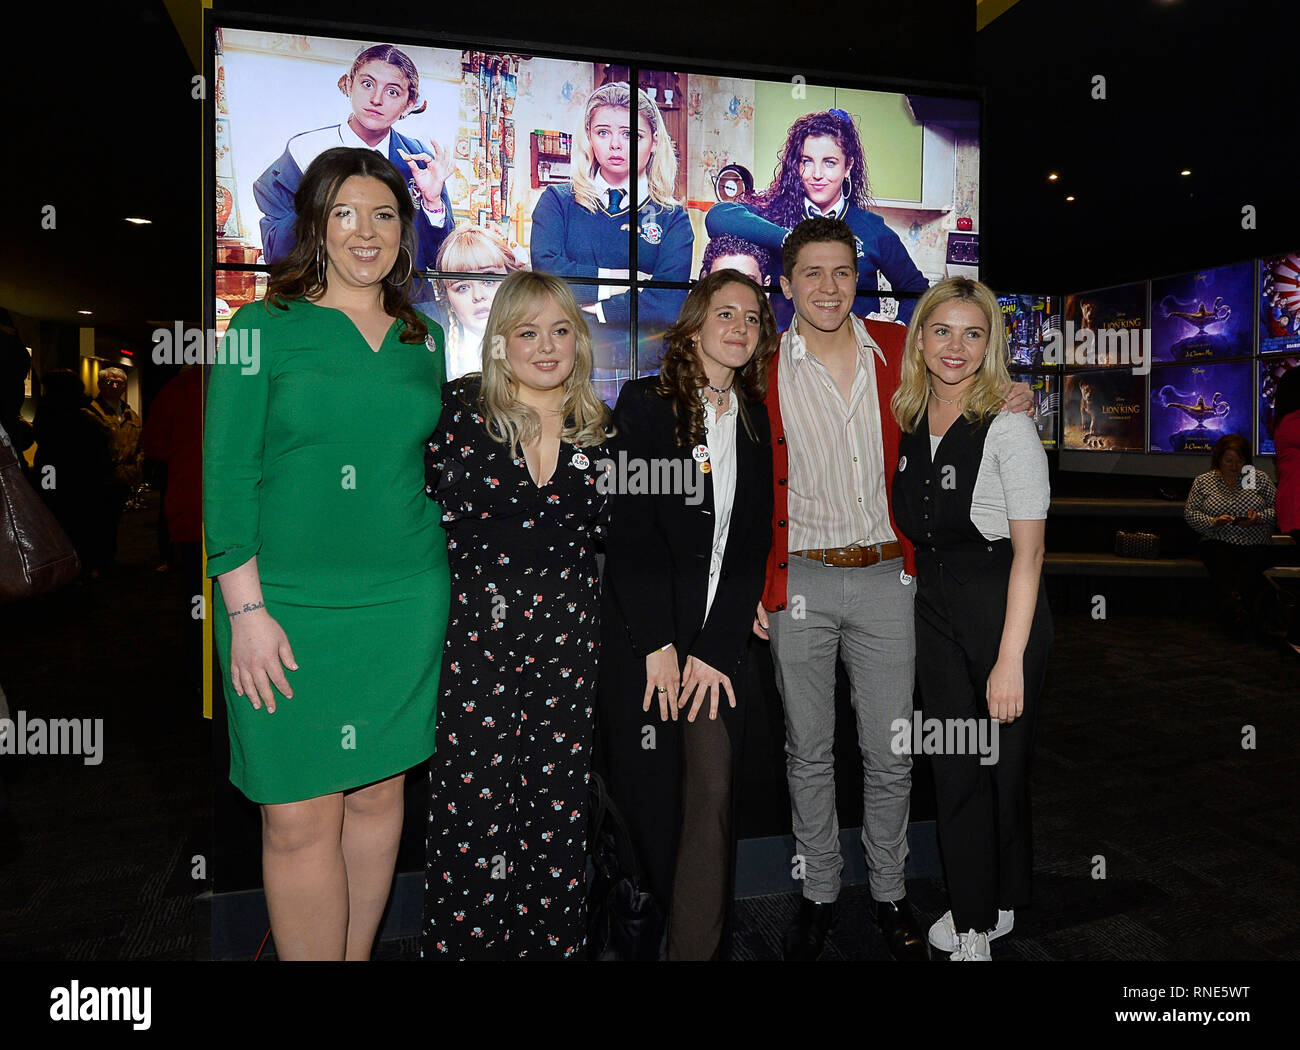 Londonderry, UK. 18th Feb, 2019. Derry Girls Series 2 Premiere, Londonderry, Northern Ireland: 18th February 2019. Writer Lisa McGee, and actors Nicola Coughlan, Louisa Harland, Dylan Llewellyn and Saoirse Jackson at the Omniplex Cinema, Londonderry for the premiere of Derry Girls Series 2.  ©George Sweeney / Alamy Live News Credit: George Sweeney/Alamy Live News Stock Photo